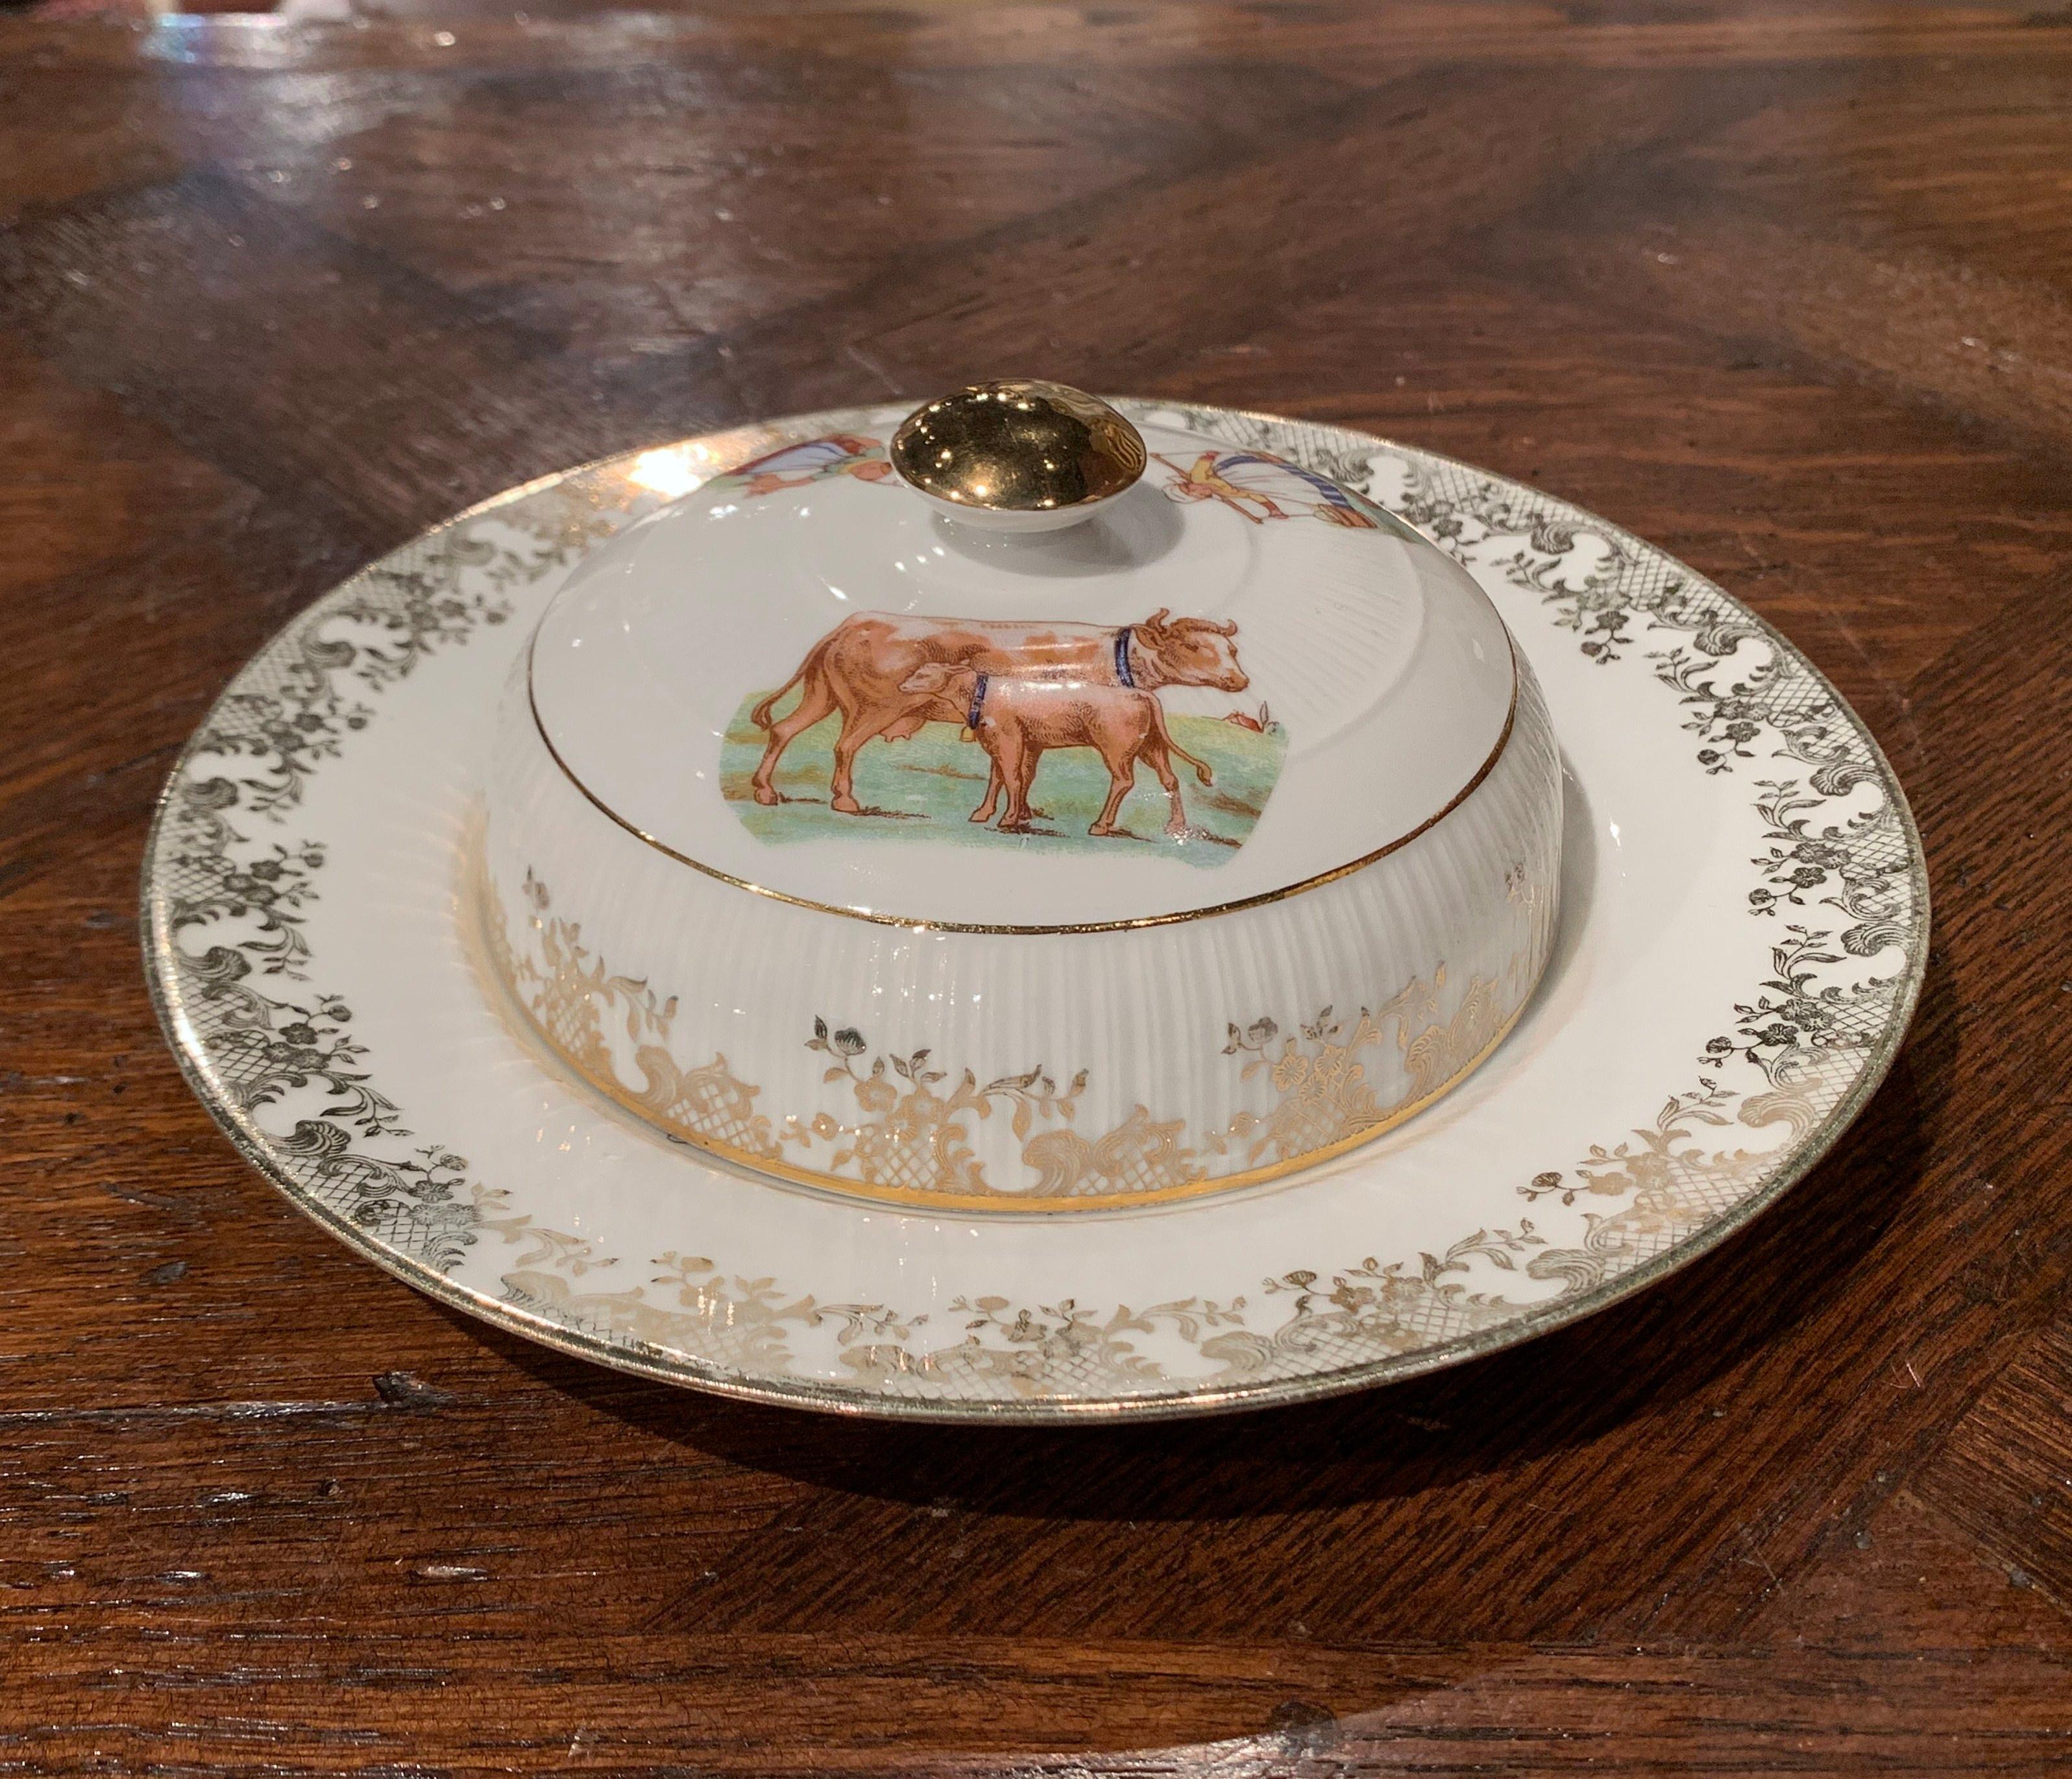 This antique butter or cheese dish was created in Limoges, France circa 1880. The two-piece porcelain plate and dome with knob are hand painted with pastoral scenes including farmer ladies and cows. Both pieces are in excellent condition with soft